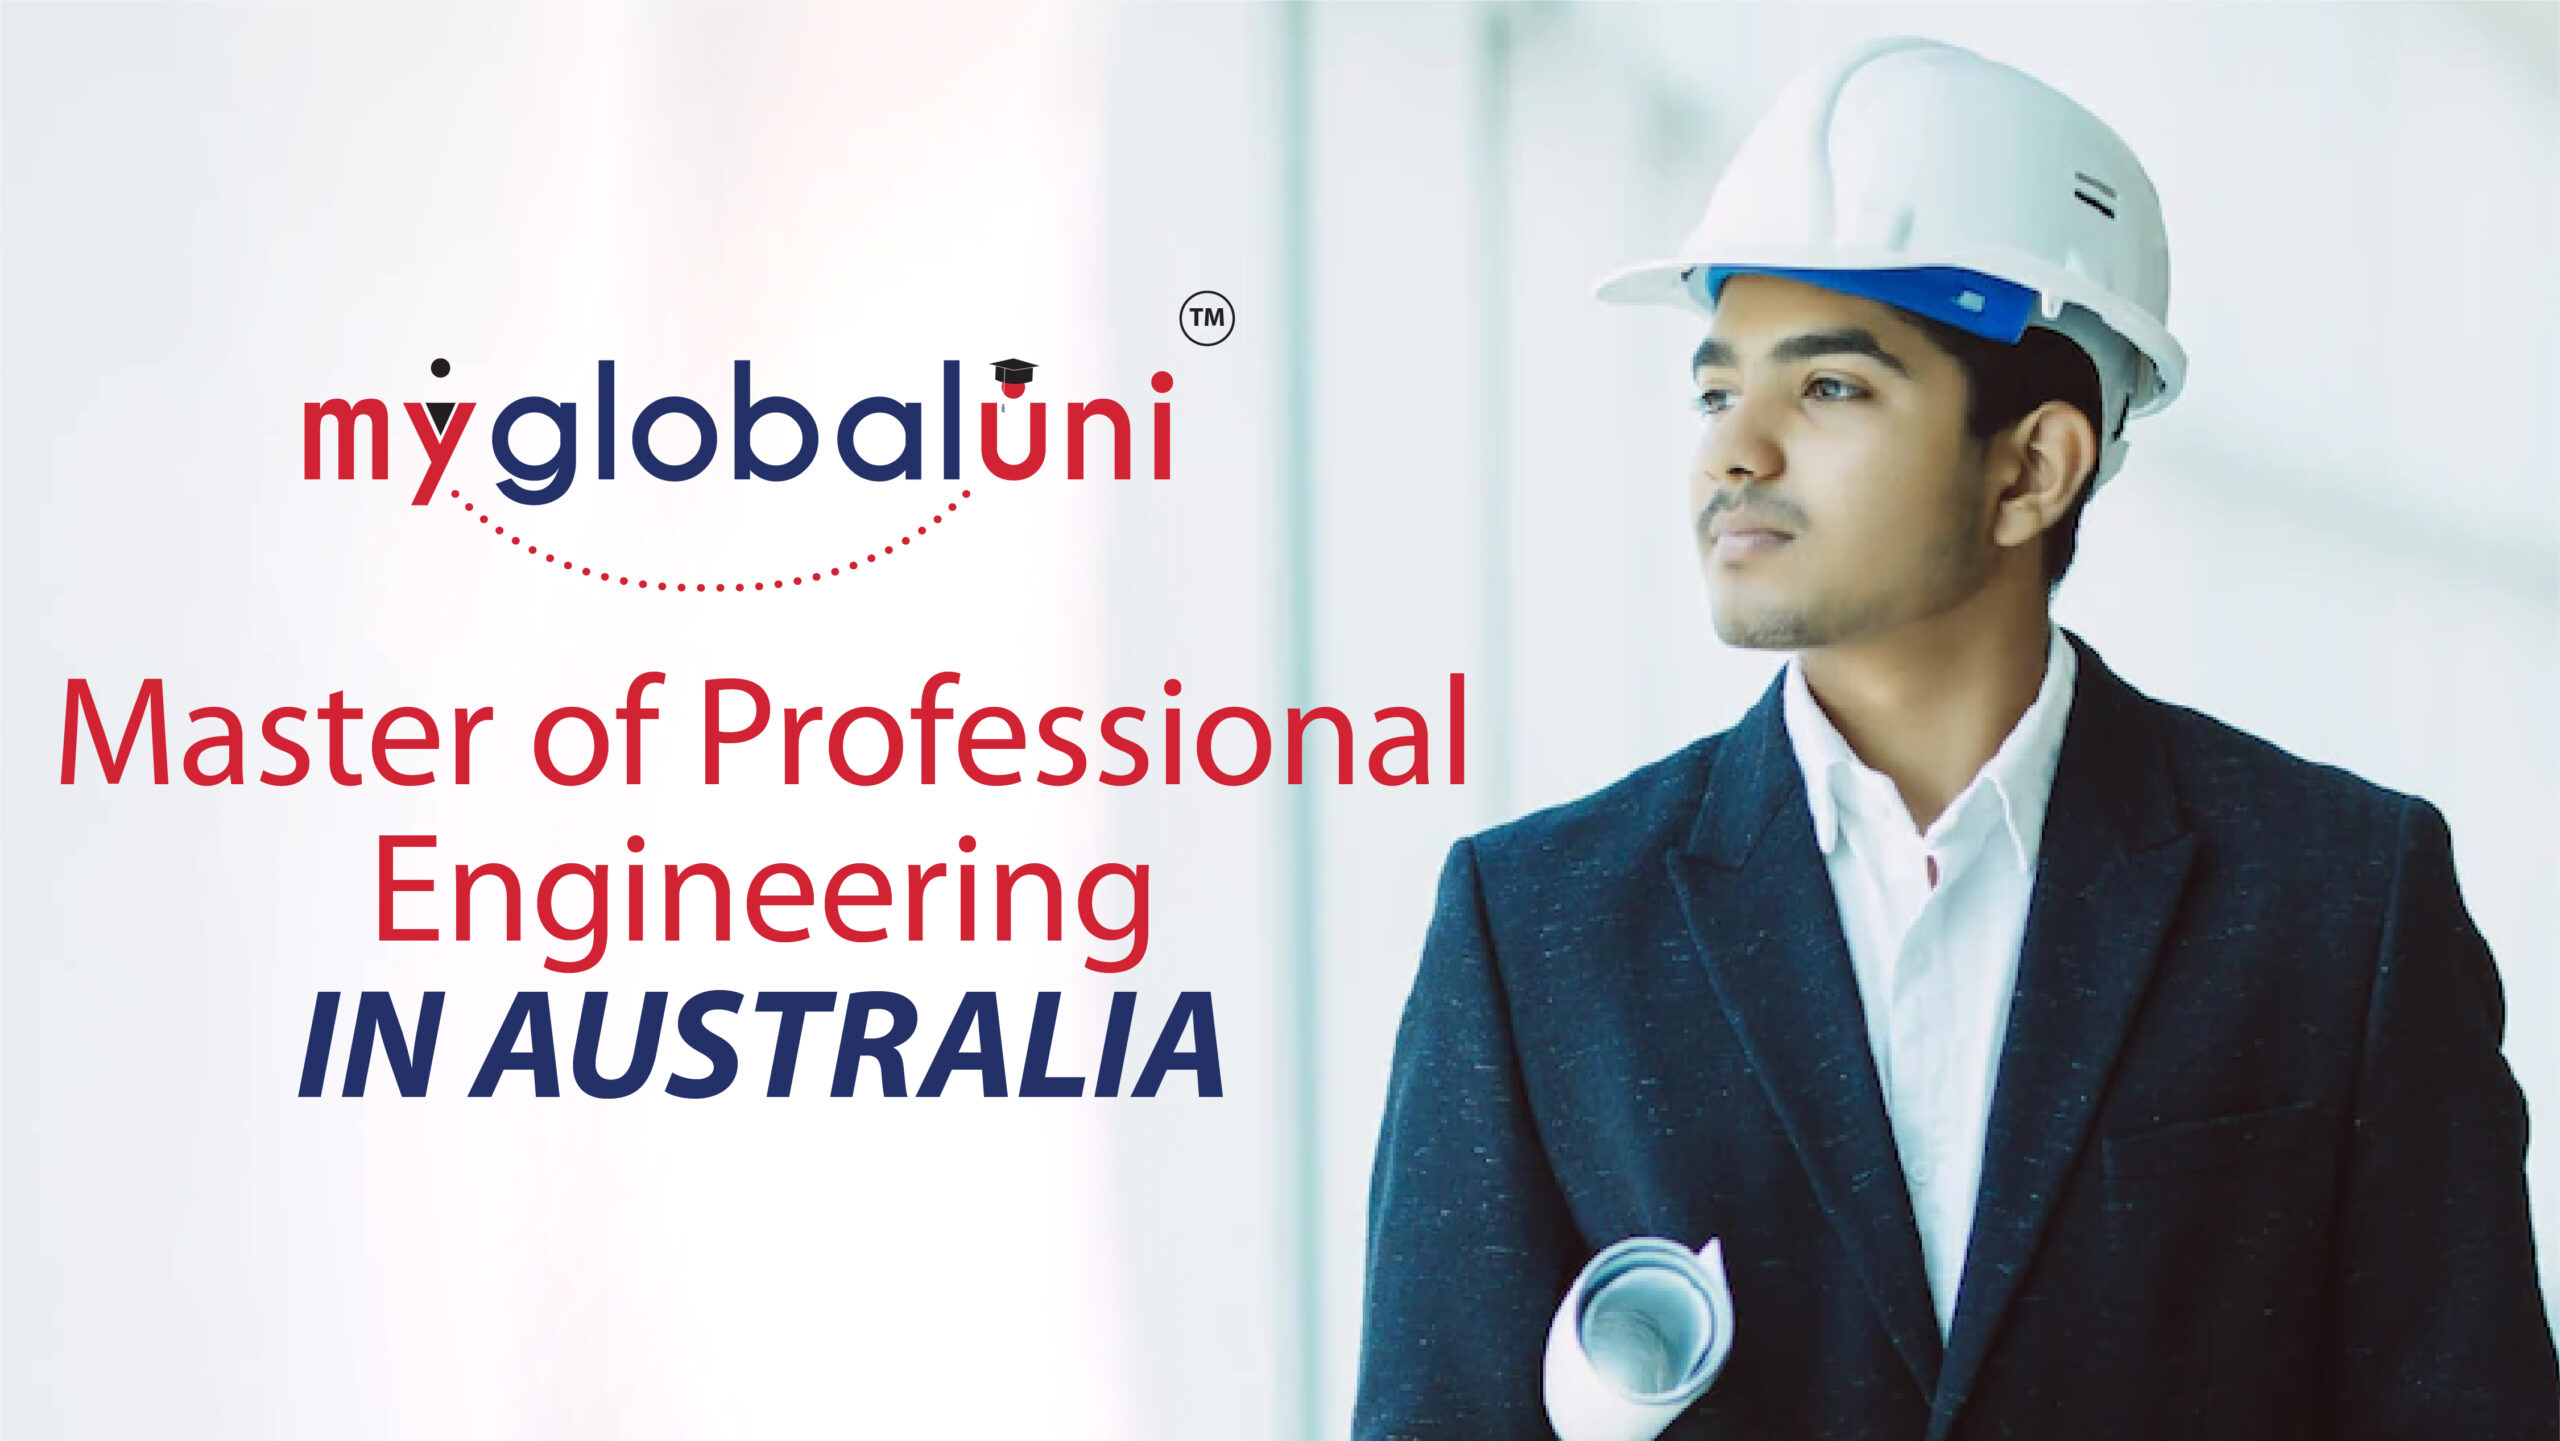 Pursue a Master’s Degree in Professional Engineering from Study Abroad Australia